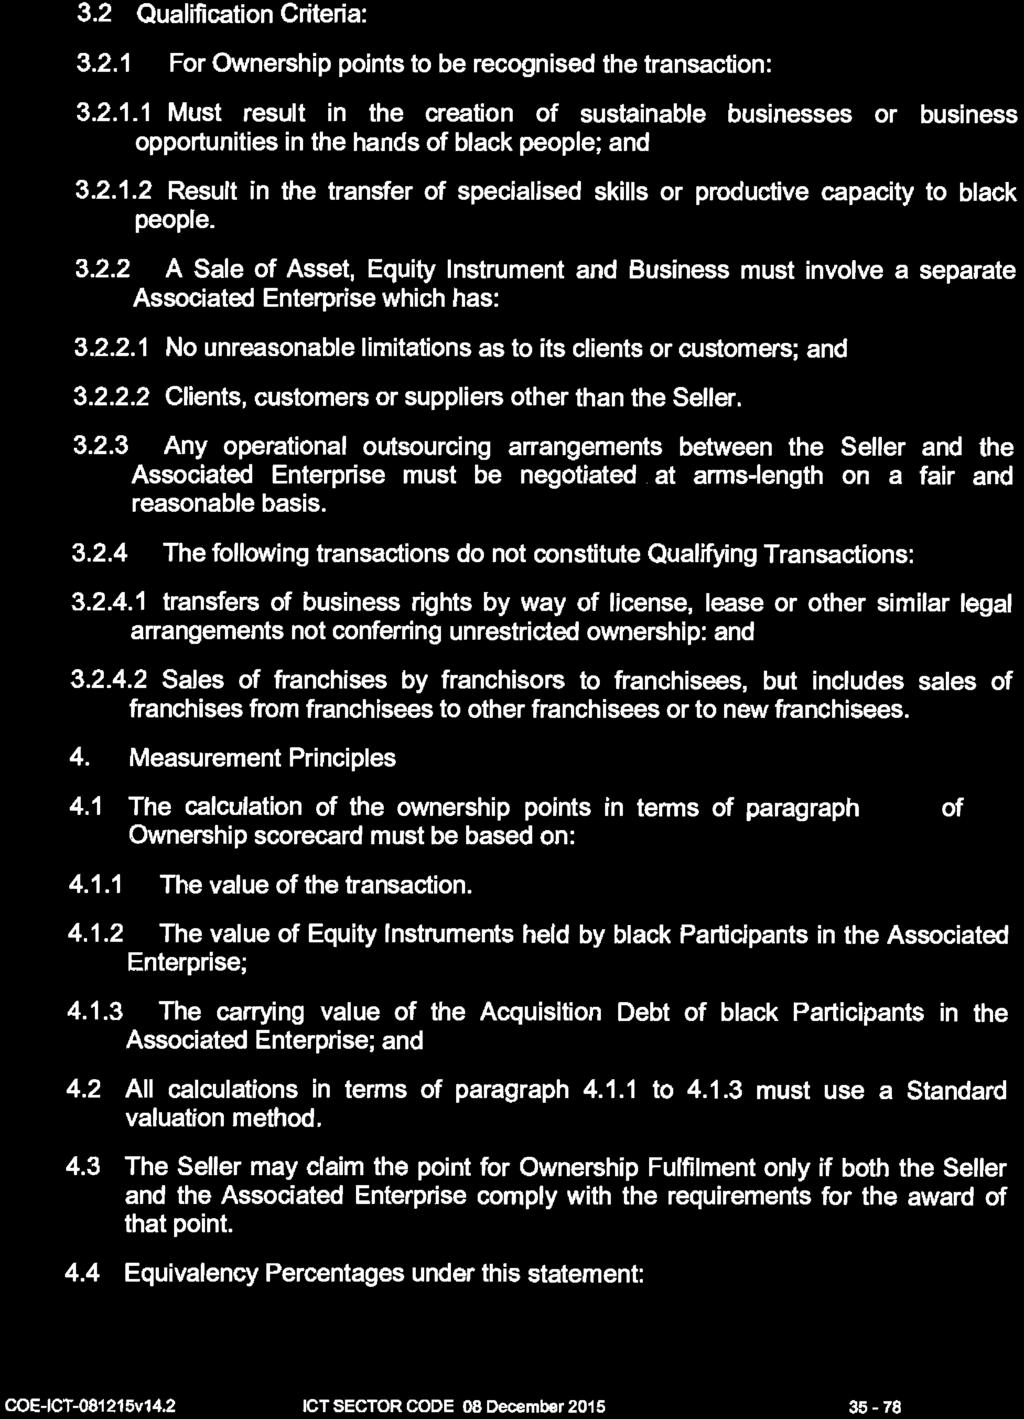 STAATSKOERANT, 24 FEBRUARIE 2016 No. 39726 39 3.2 Qualification Criteria: 3.2.1 For Ownership points to be recognised the transaction: 3.2.1.1 Must result in the creation of sustainable businesses or business opportunities in the hands of black people; and 3.